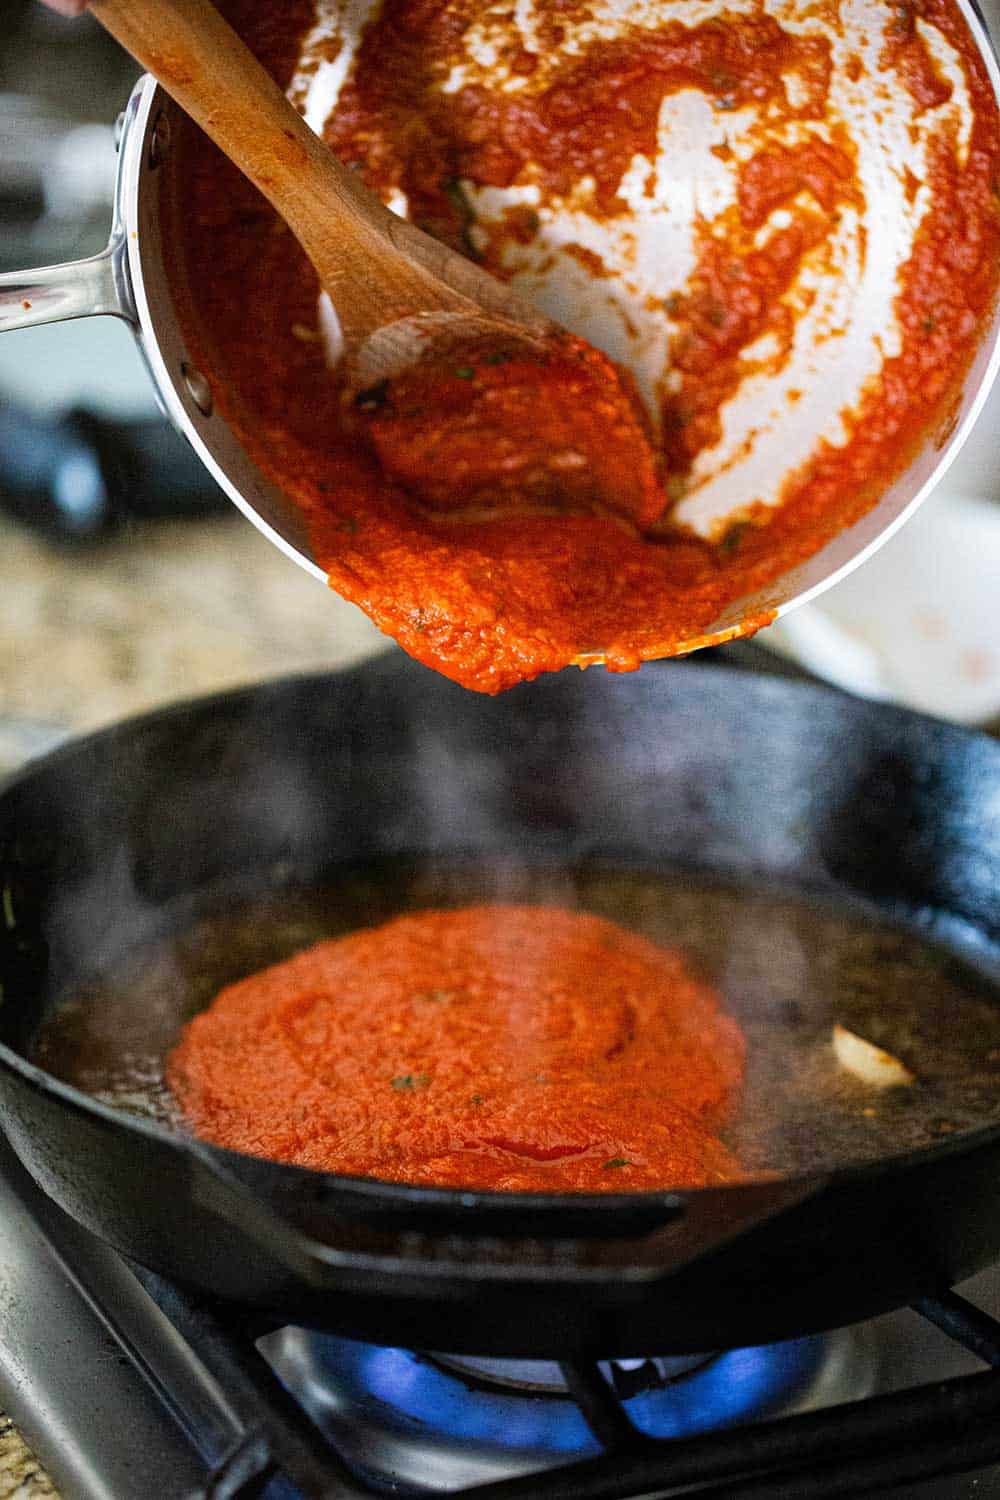 A medium-sized pot being held over a cast-iron skillet on a stove with tomato sauce transferring from the pot to the skillet.